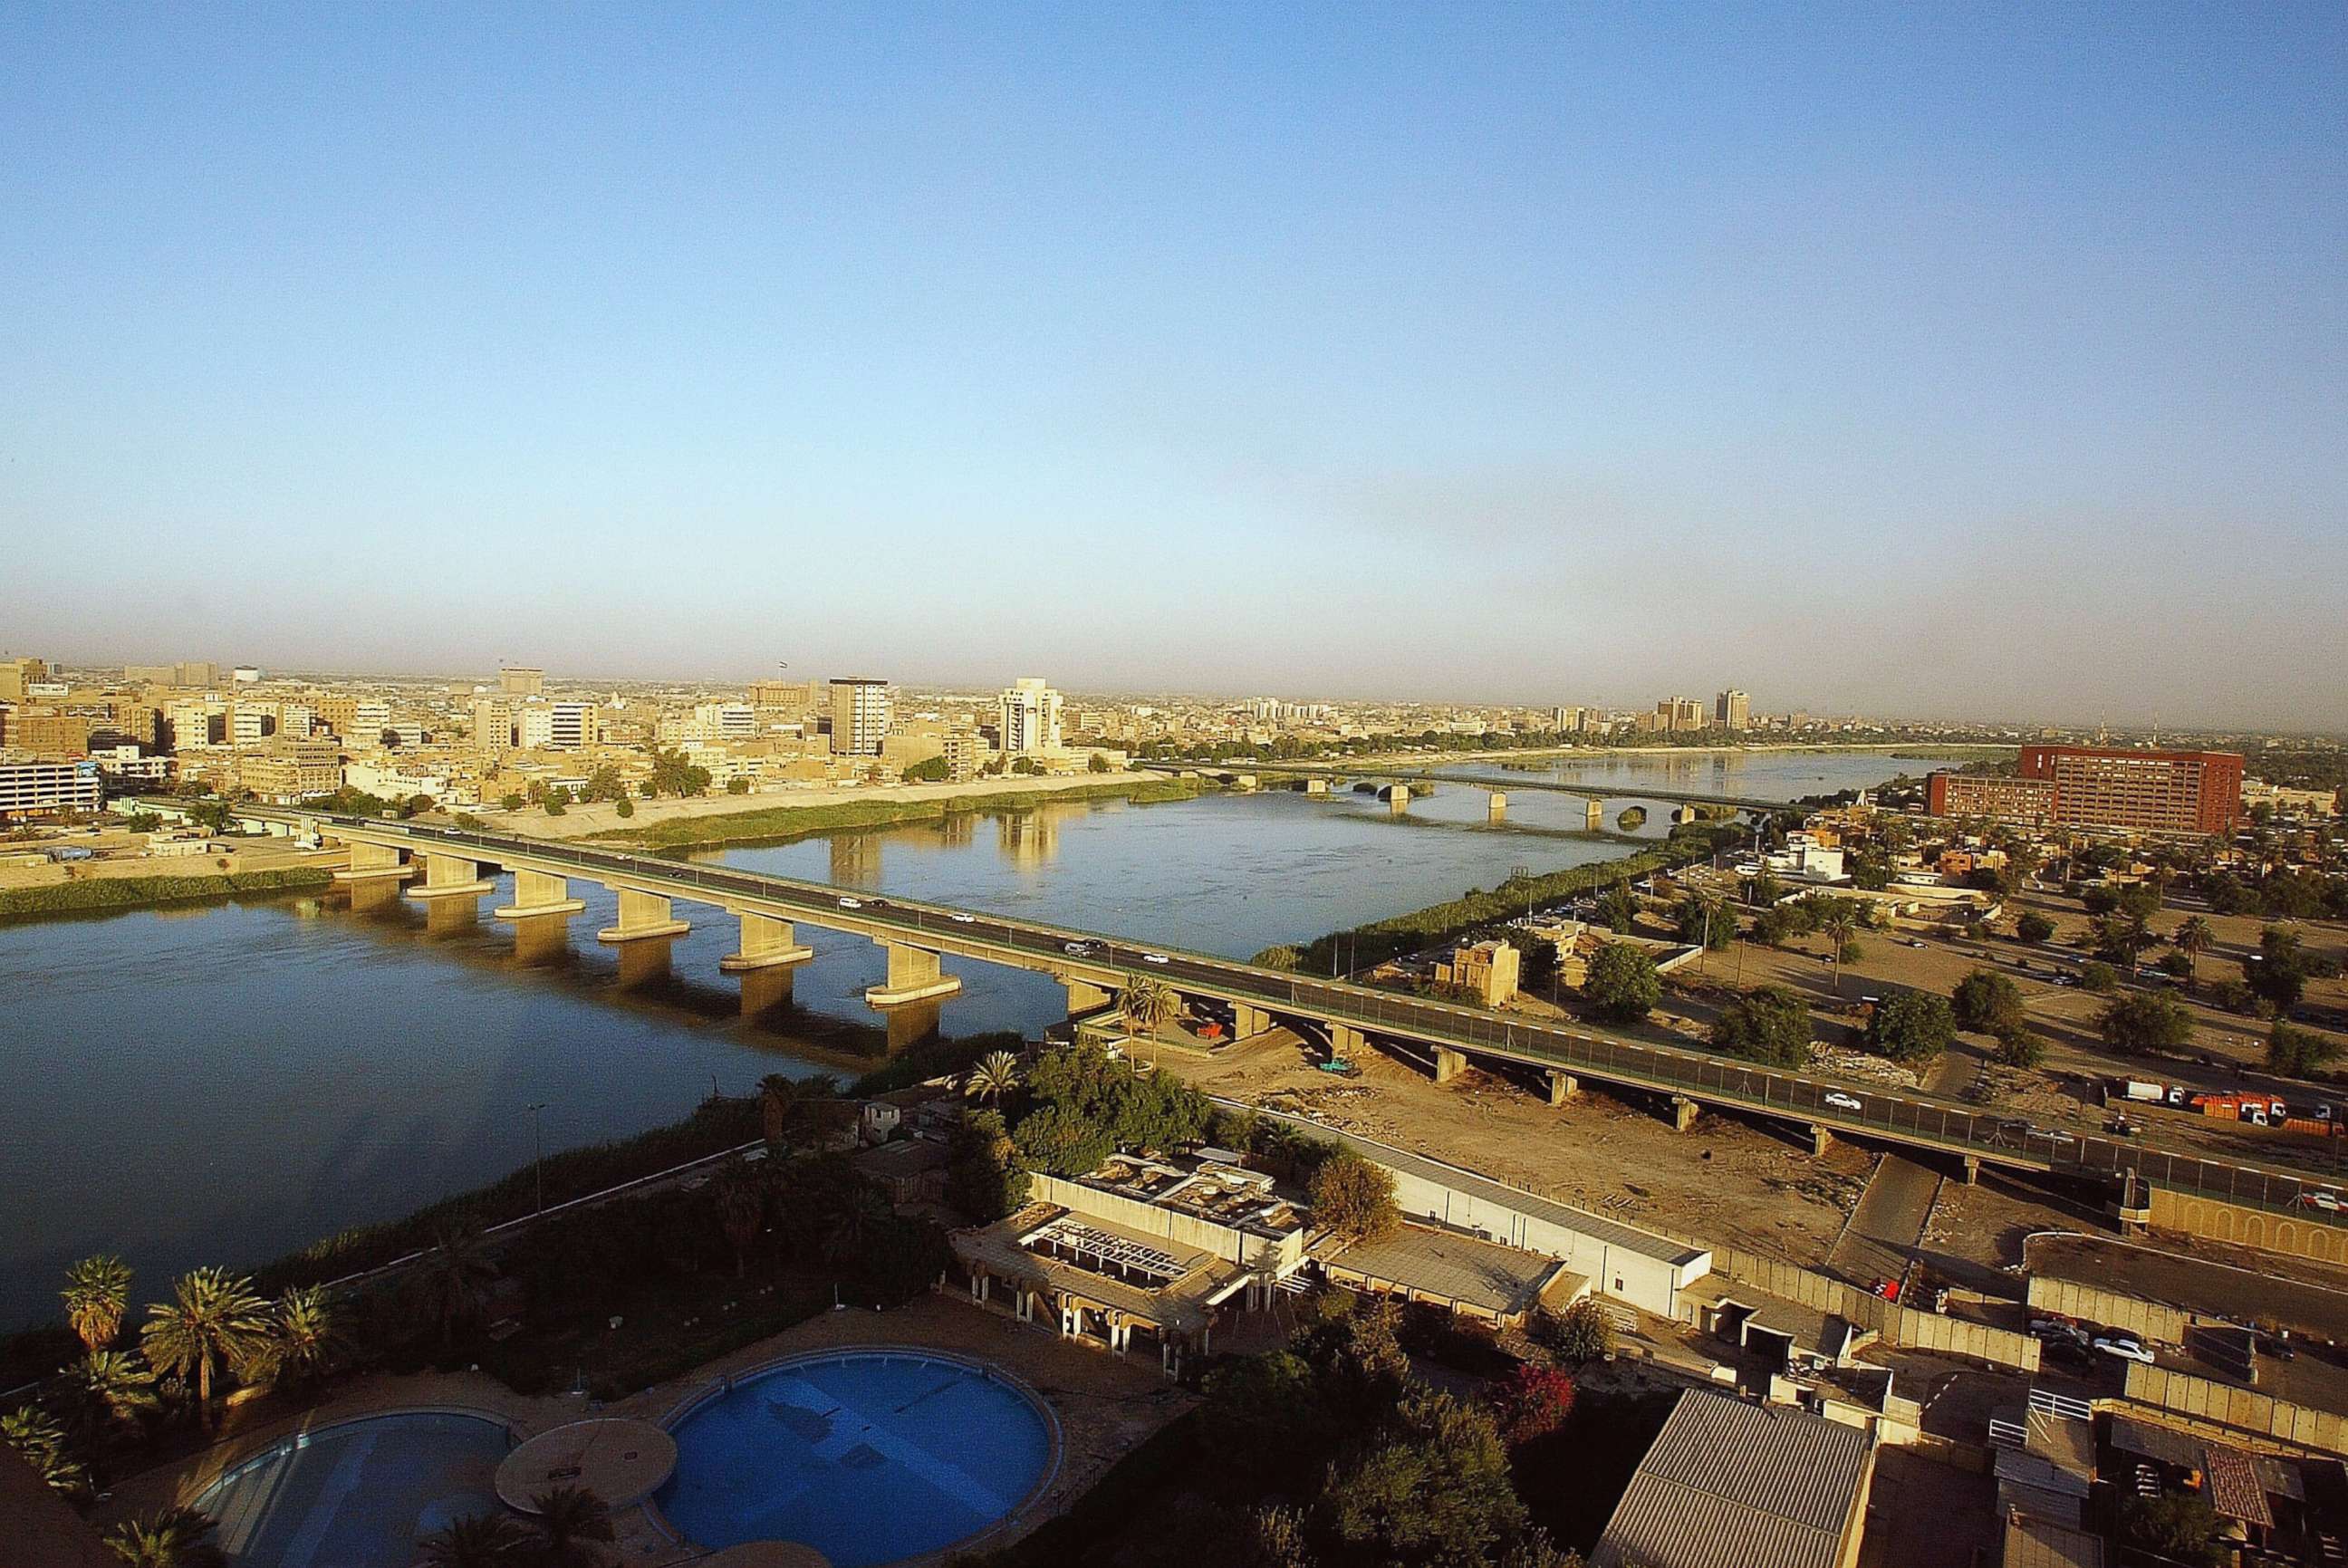 PHOTO: The Tigris River and the skyline of Baghdad, Iraq, Sept. 21, 2006.